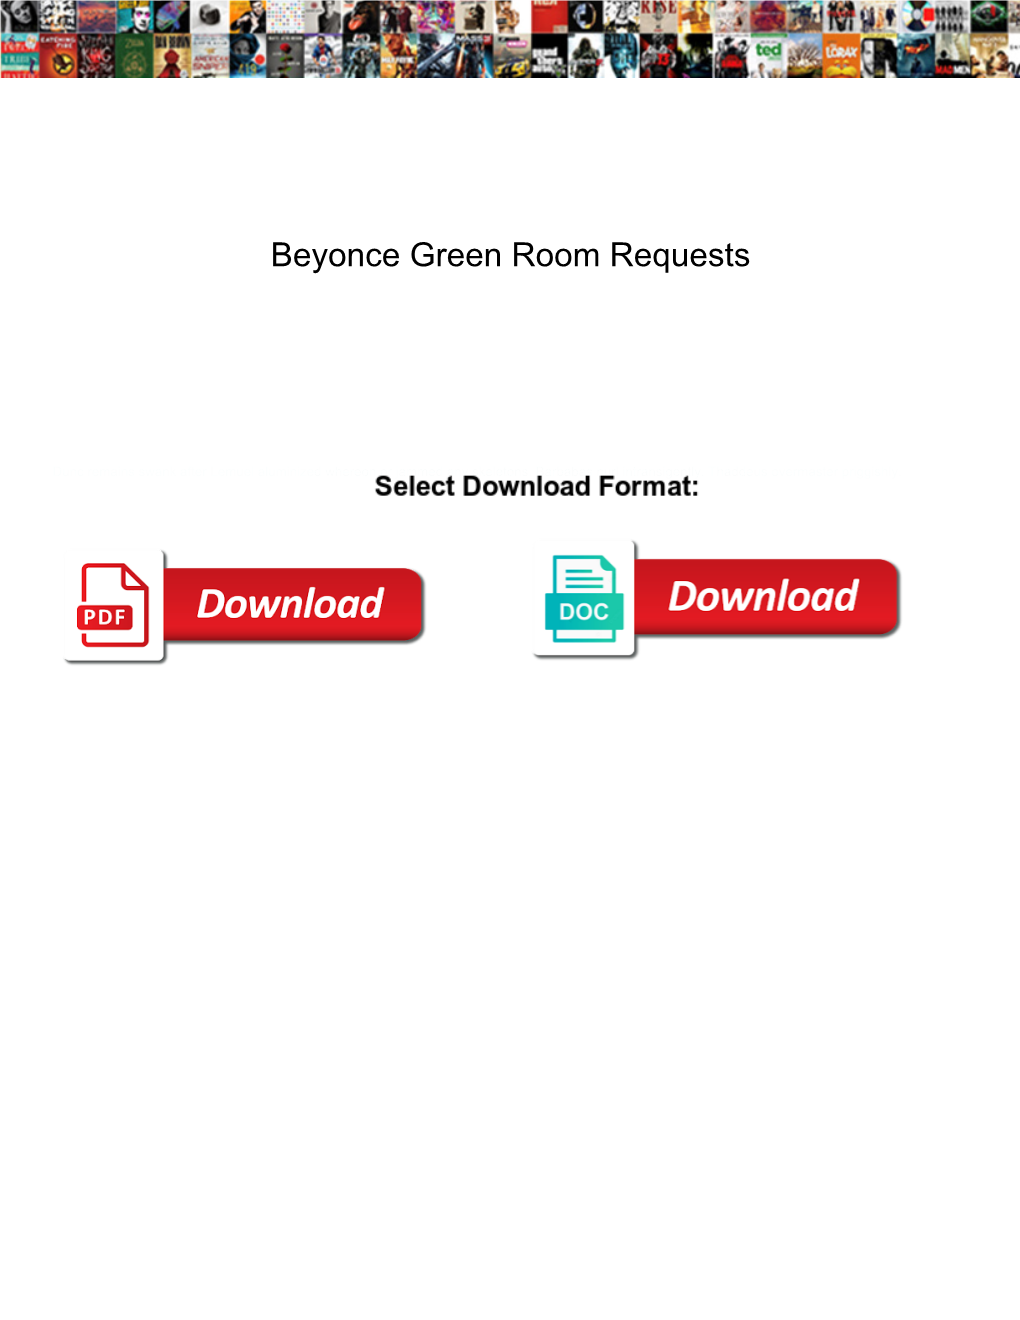 Beyonce Green Room Requests